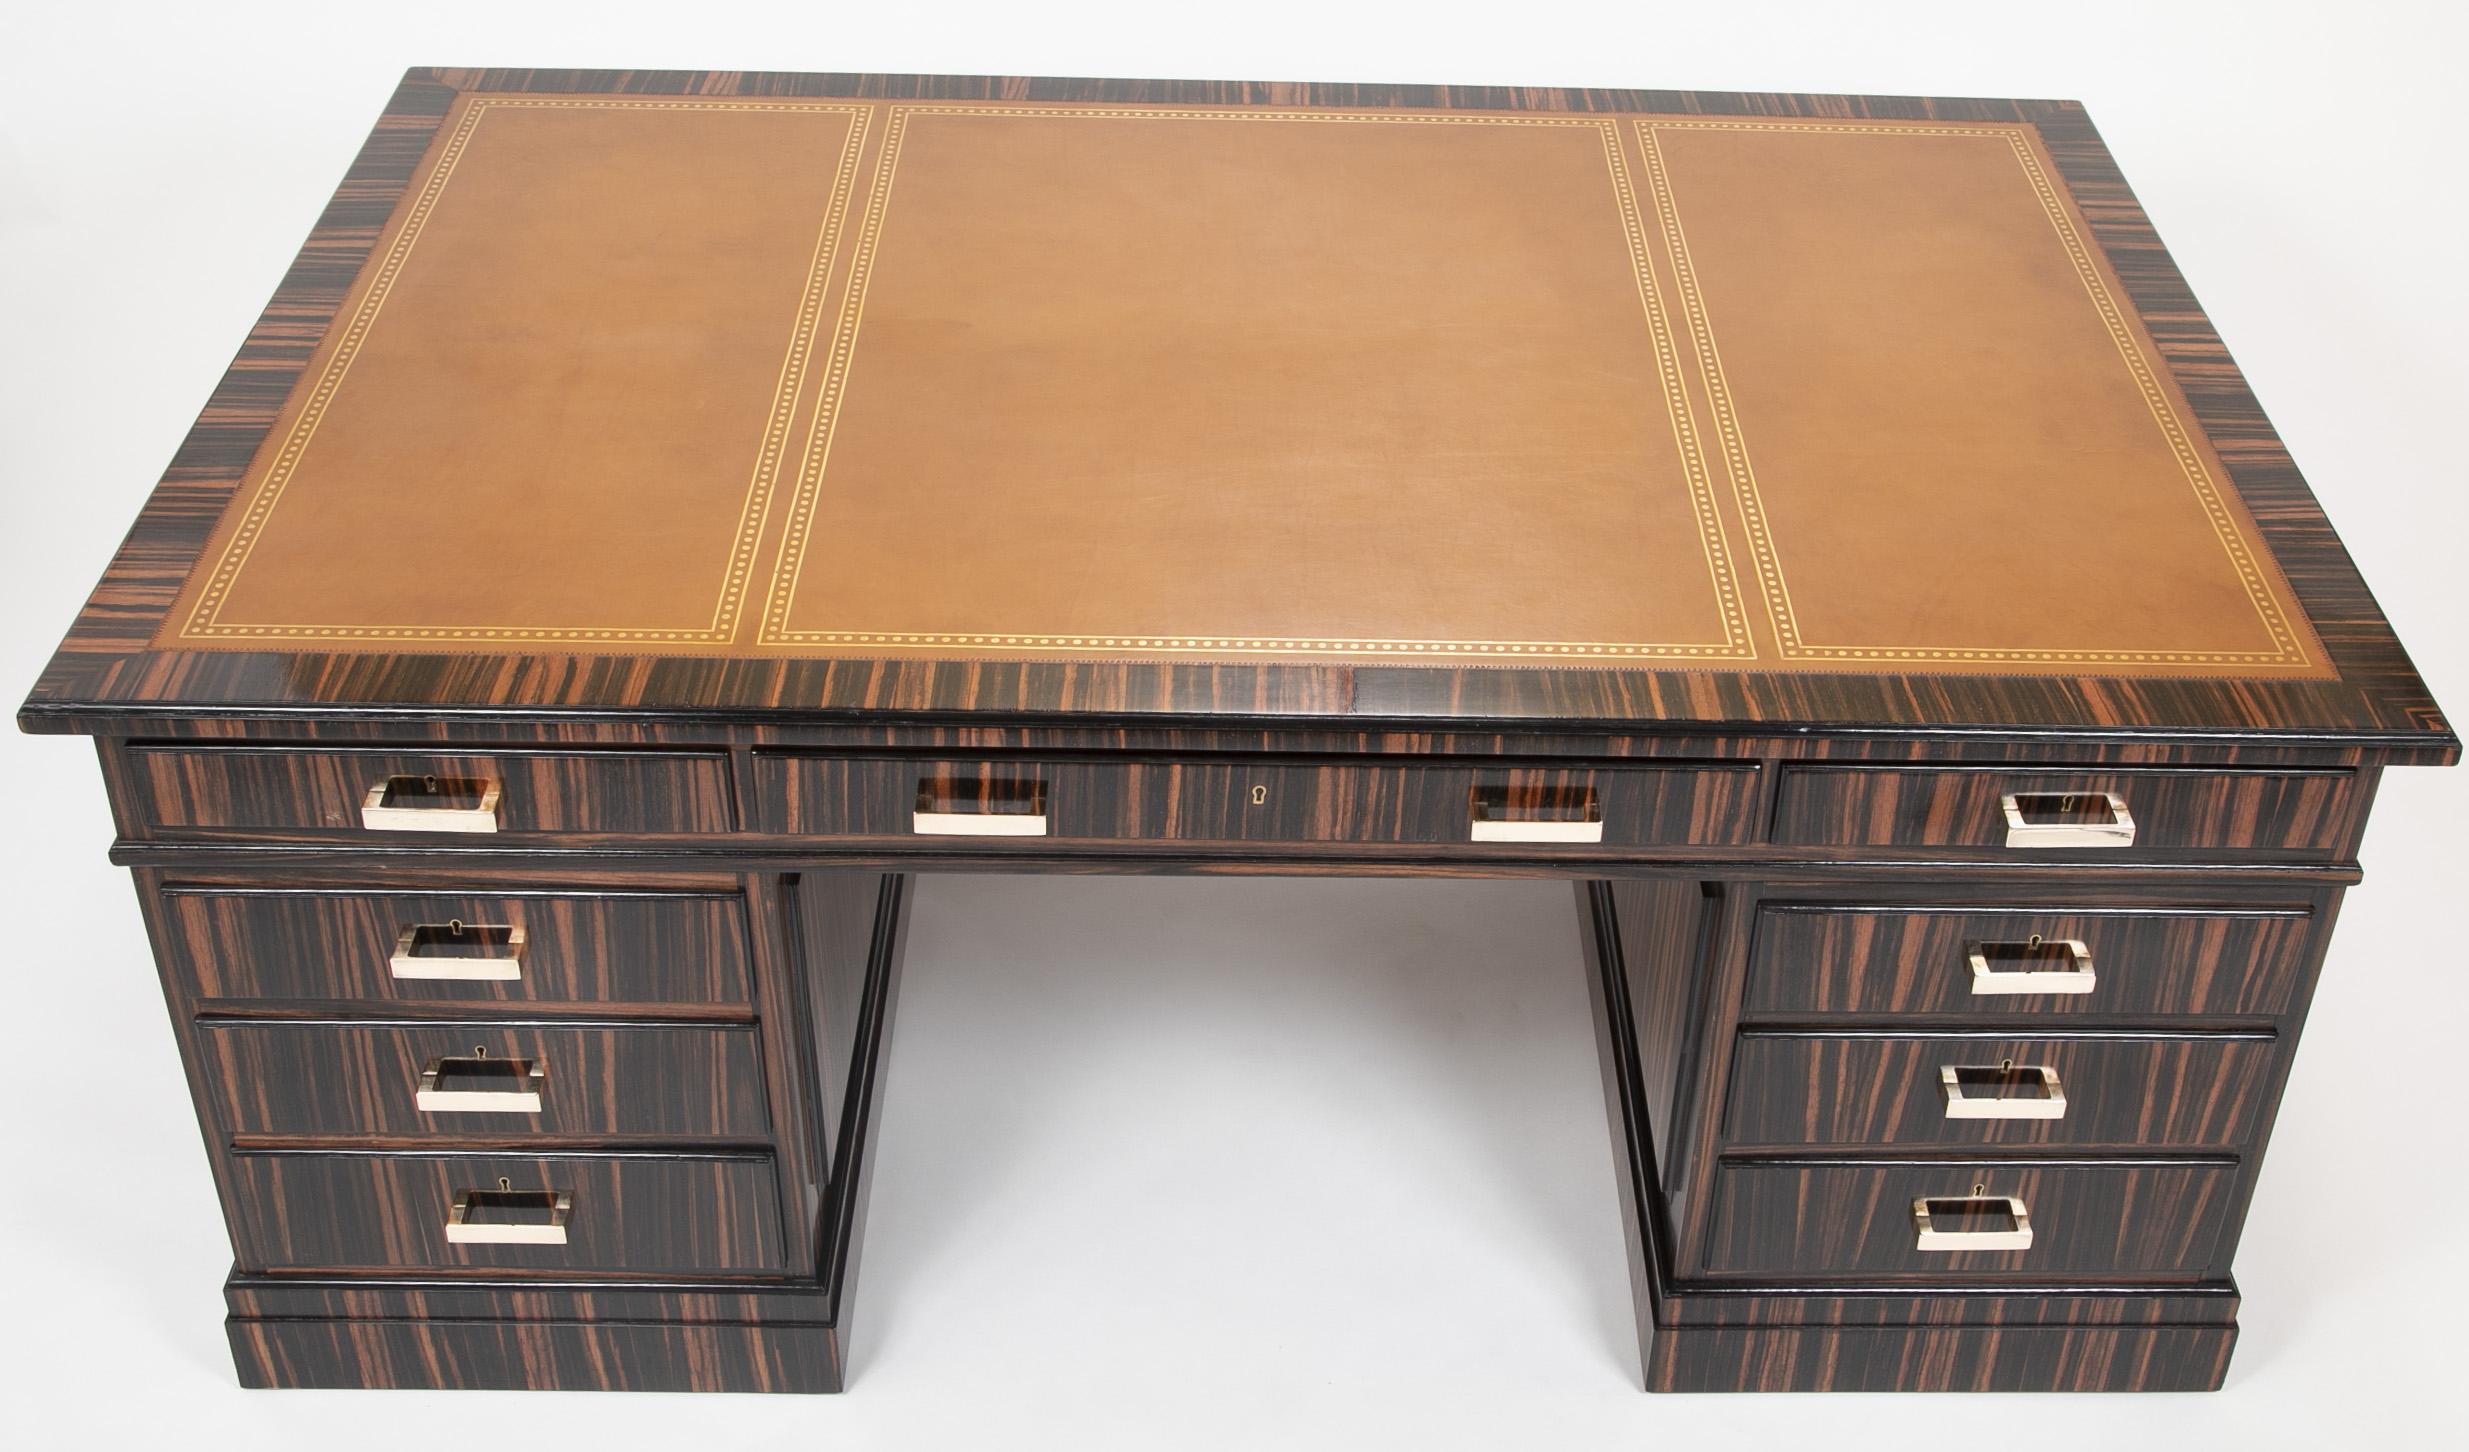 Large nine-drawer Macassar ebony pedestal desk by Waring & Gillow having a red tooled leather top and bronze hardware. Stamped in upper left drawer.

